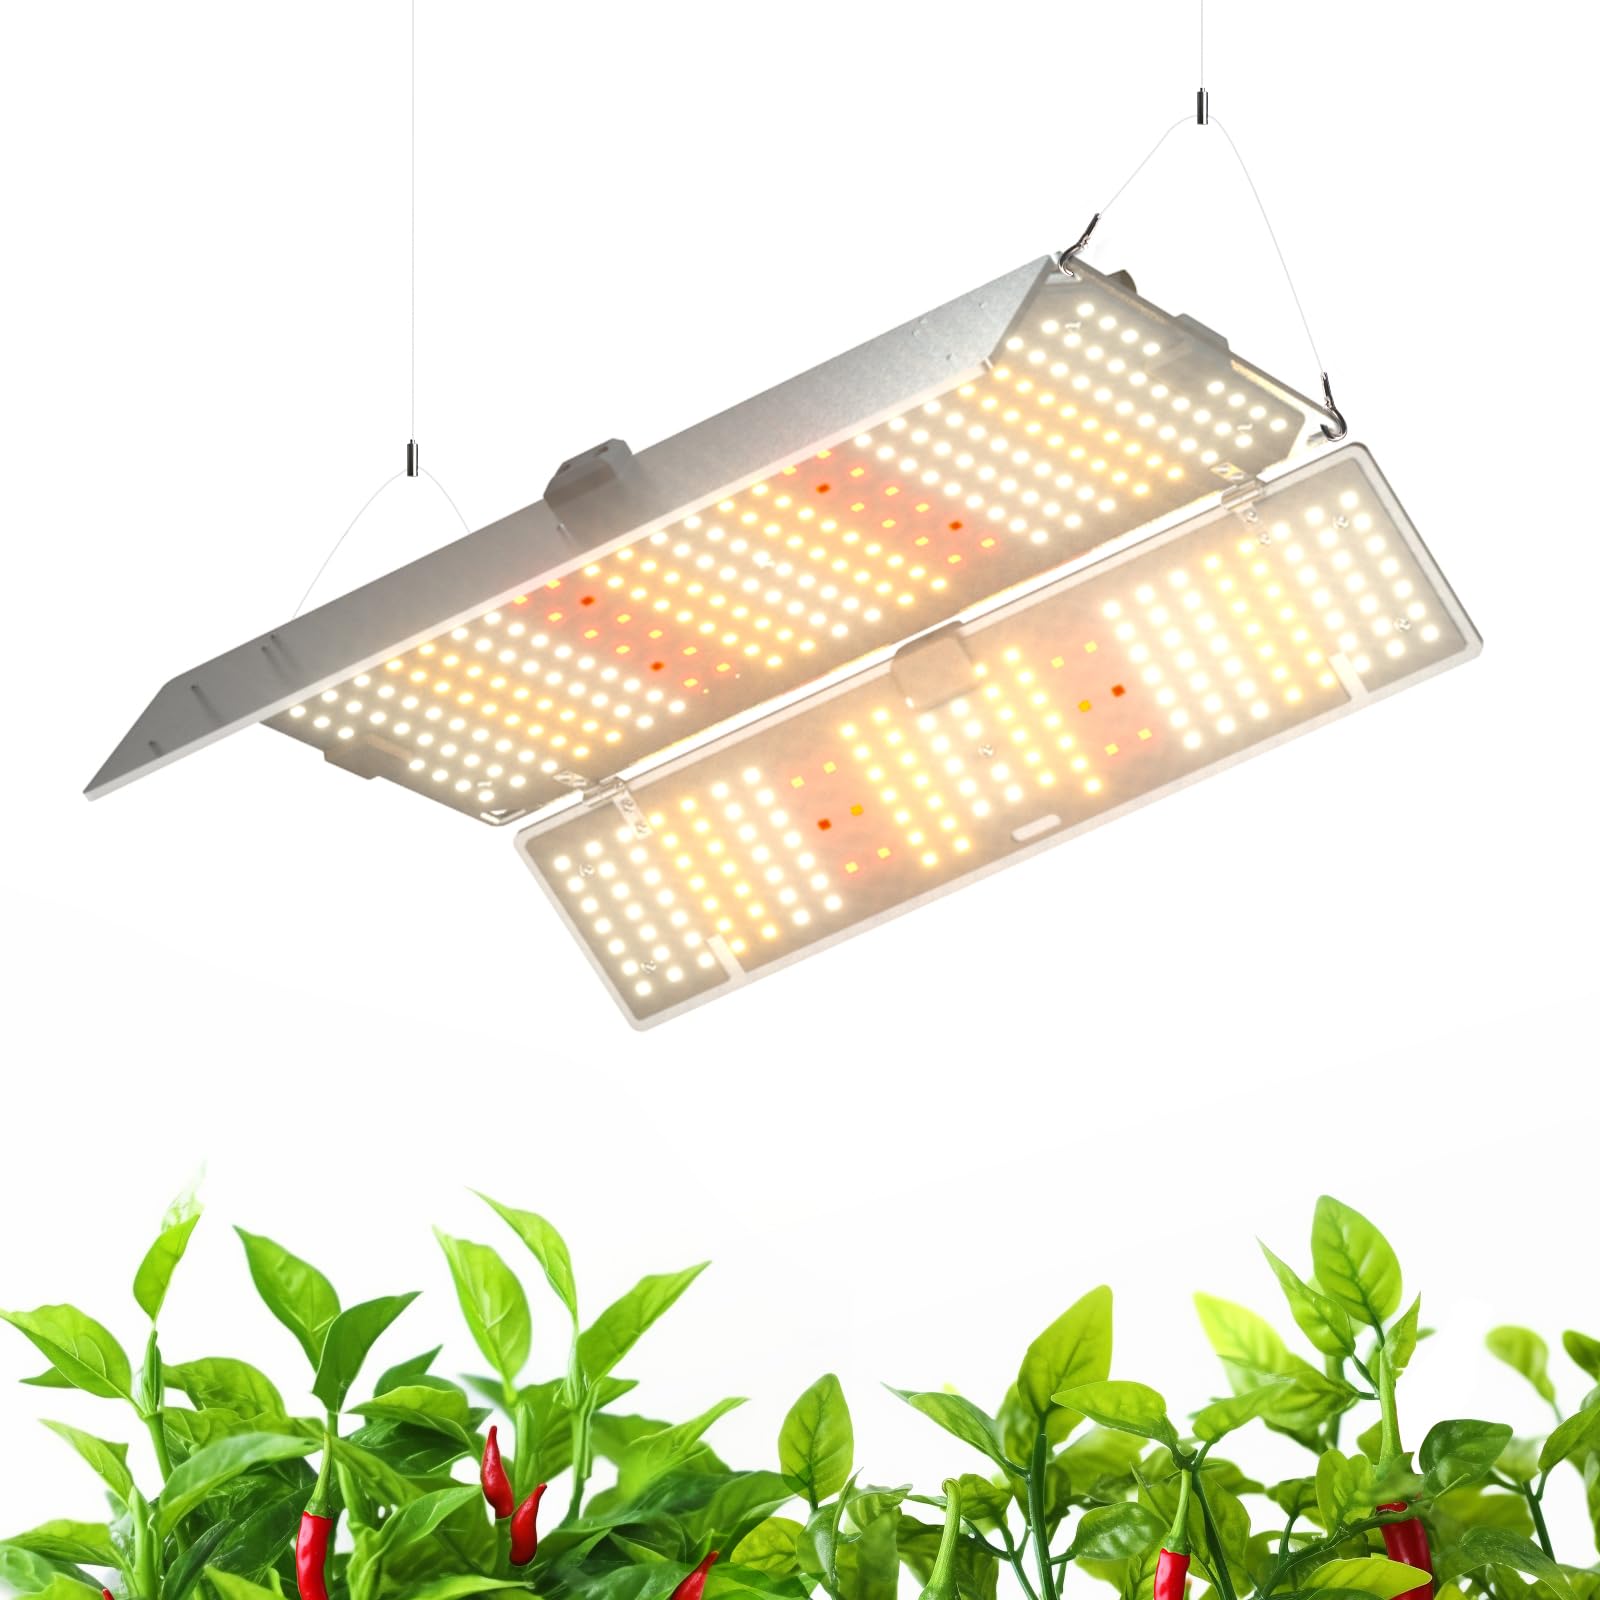 Barrina BU2000 LED Grow Light, Full Spectrum with IR, 4x4FT Coverage, Dimmable, Adjustable Light Panel, 816 LEDs, High PPFD, Pla